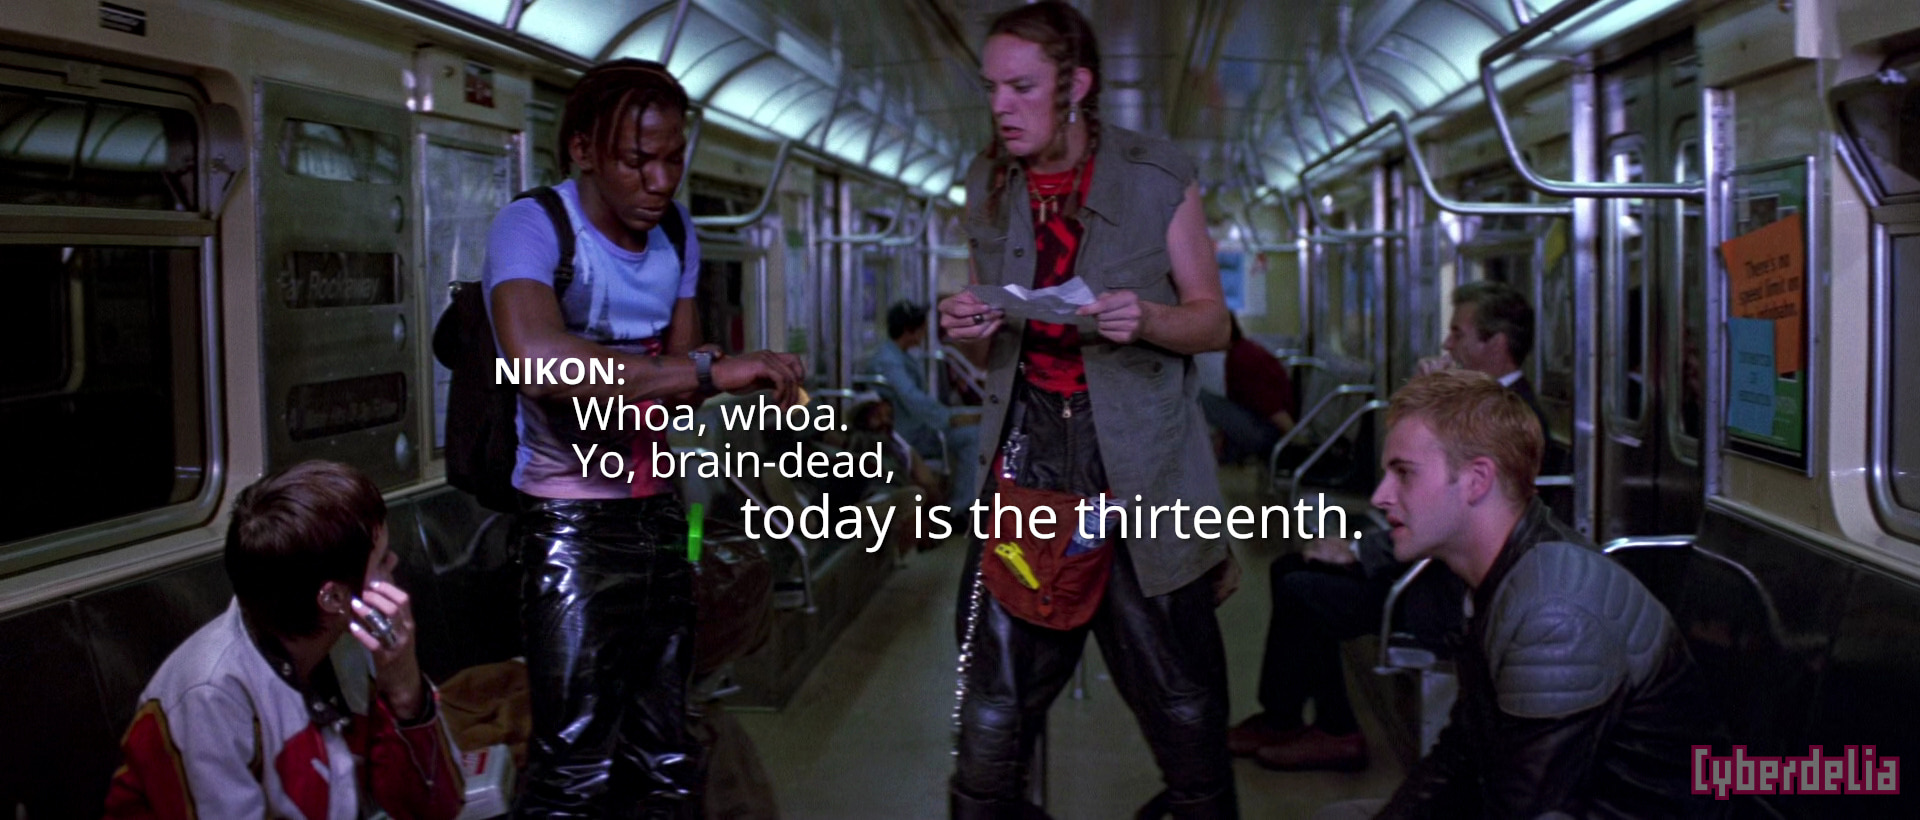 Scene from Hackers (1995) movie: character Kate/Acid Burn, Lord Nikon, Cereal Killer and Dade Murphy gathered in a subway car, holding computer paper printouts and talking. Lord Nikon and Cereal standing at center with puzzled looks, Nikon looking at his watch. Kate and Dade seated on opposite sides looking up at them. Large white text overlaid: NIKON: 'Whoa, whoa. Yo, brain-dead, today is the thirteenth.'